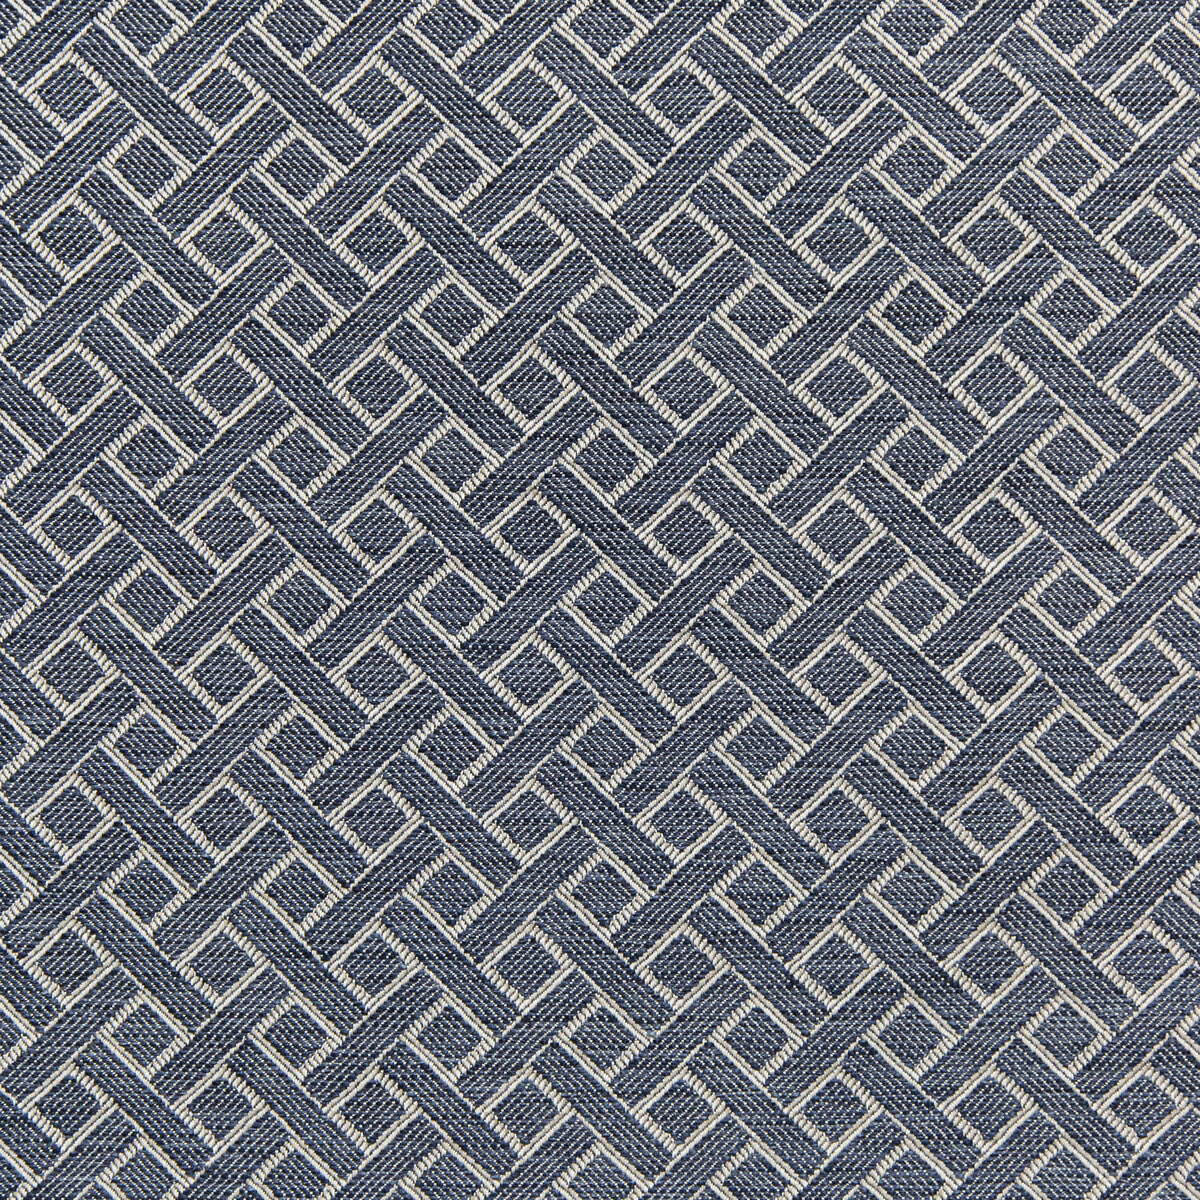 Maldon Weave fabric in navy color - pattern 2020102.50.0 - by Lee Jofa in the Linford Weaves collection